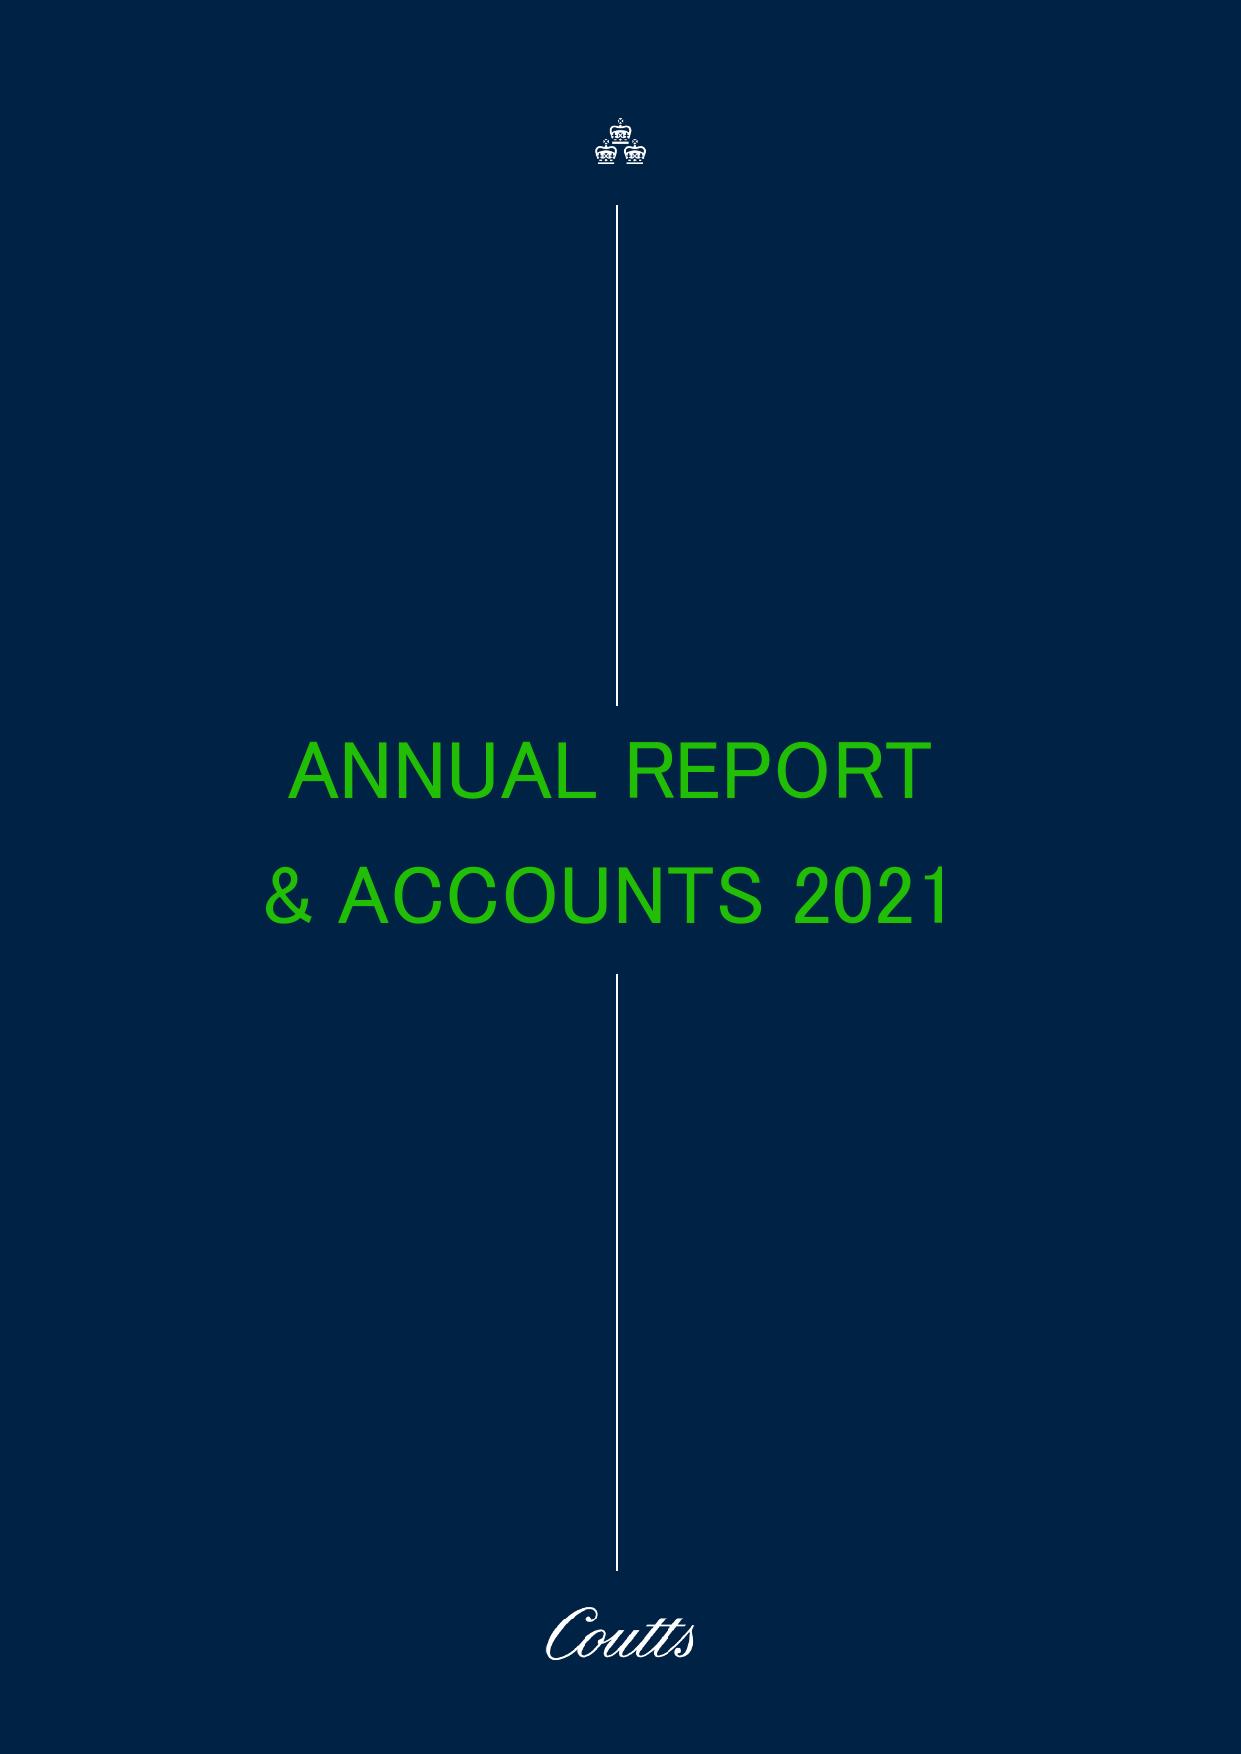 BISHOPSLAW 2021 Annual Report